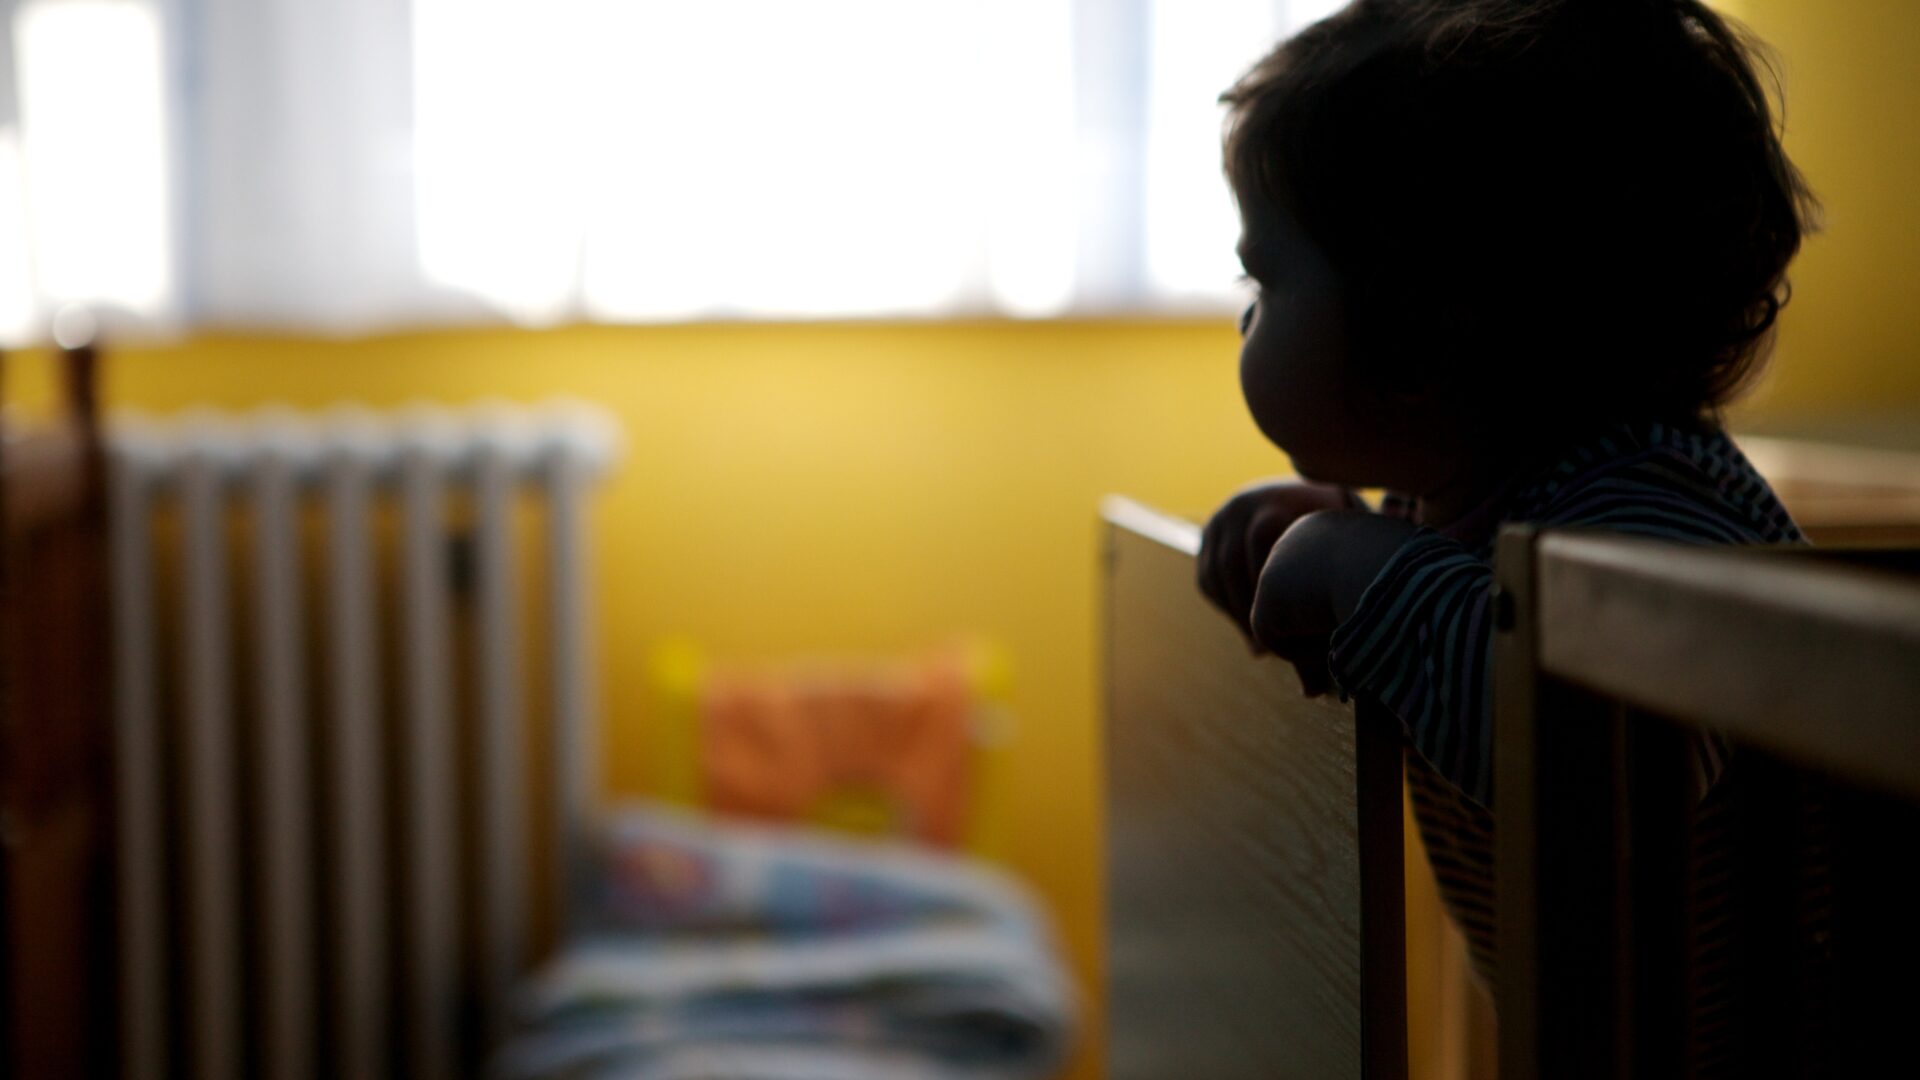 Silhouette of a small child leaning over the side of a cot in a dim room